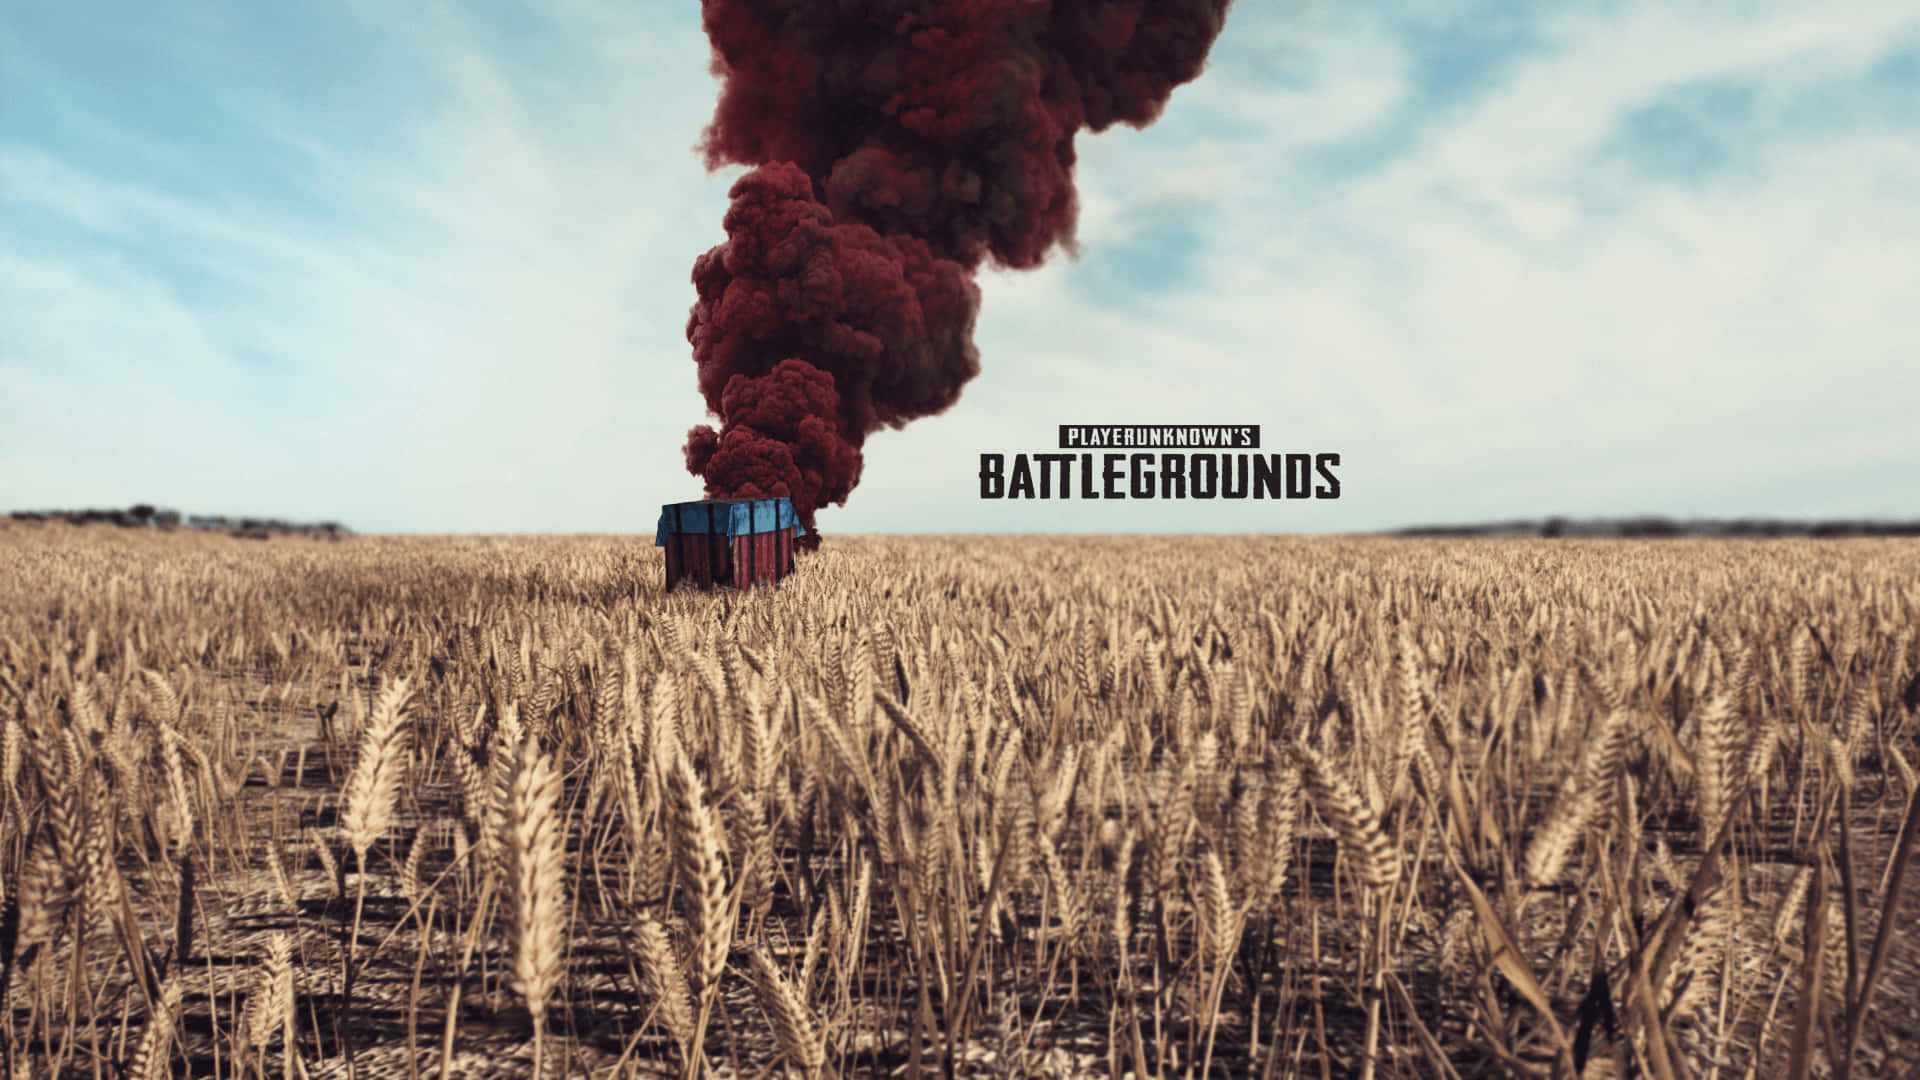 Enjoy the thrill of Player Unknown Battlegrounds in this explosive survival shooting game. Wallpaper